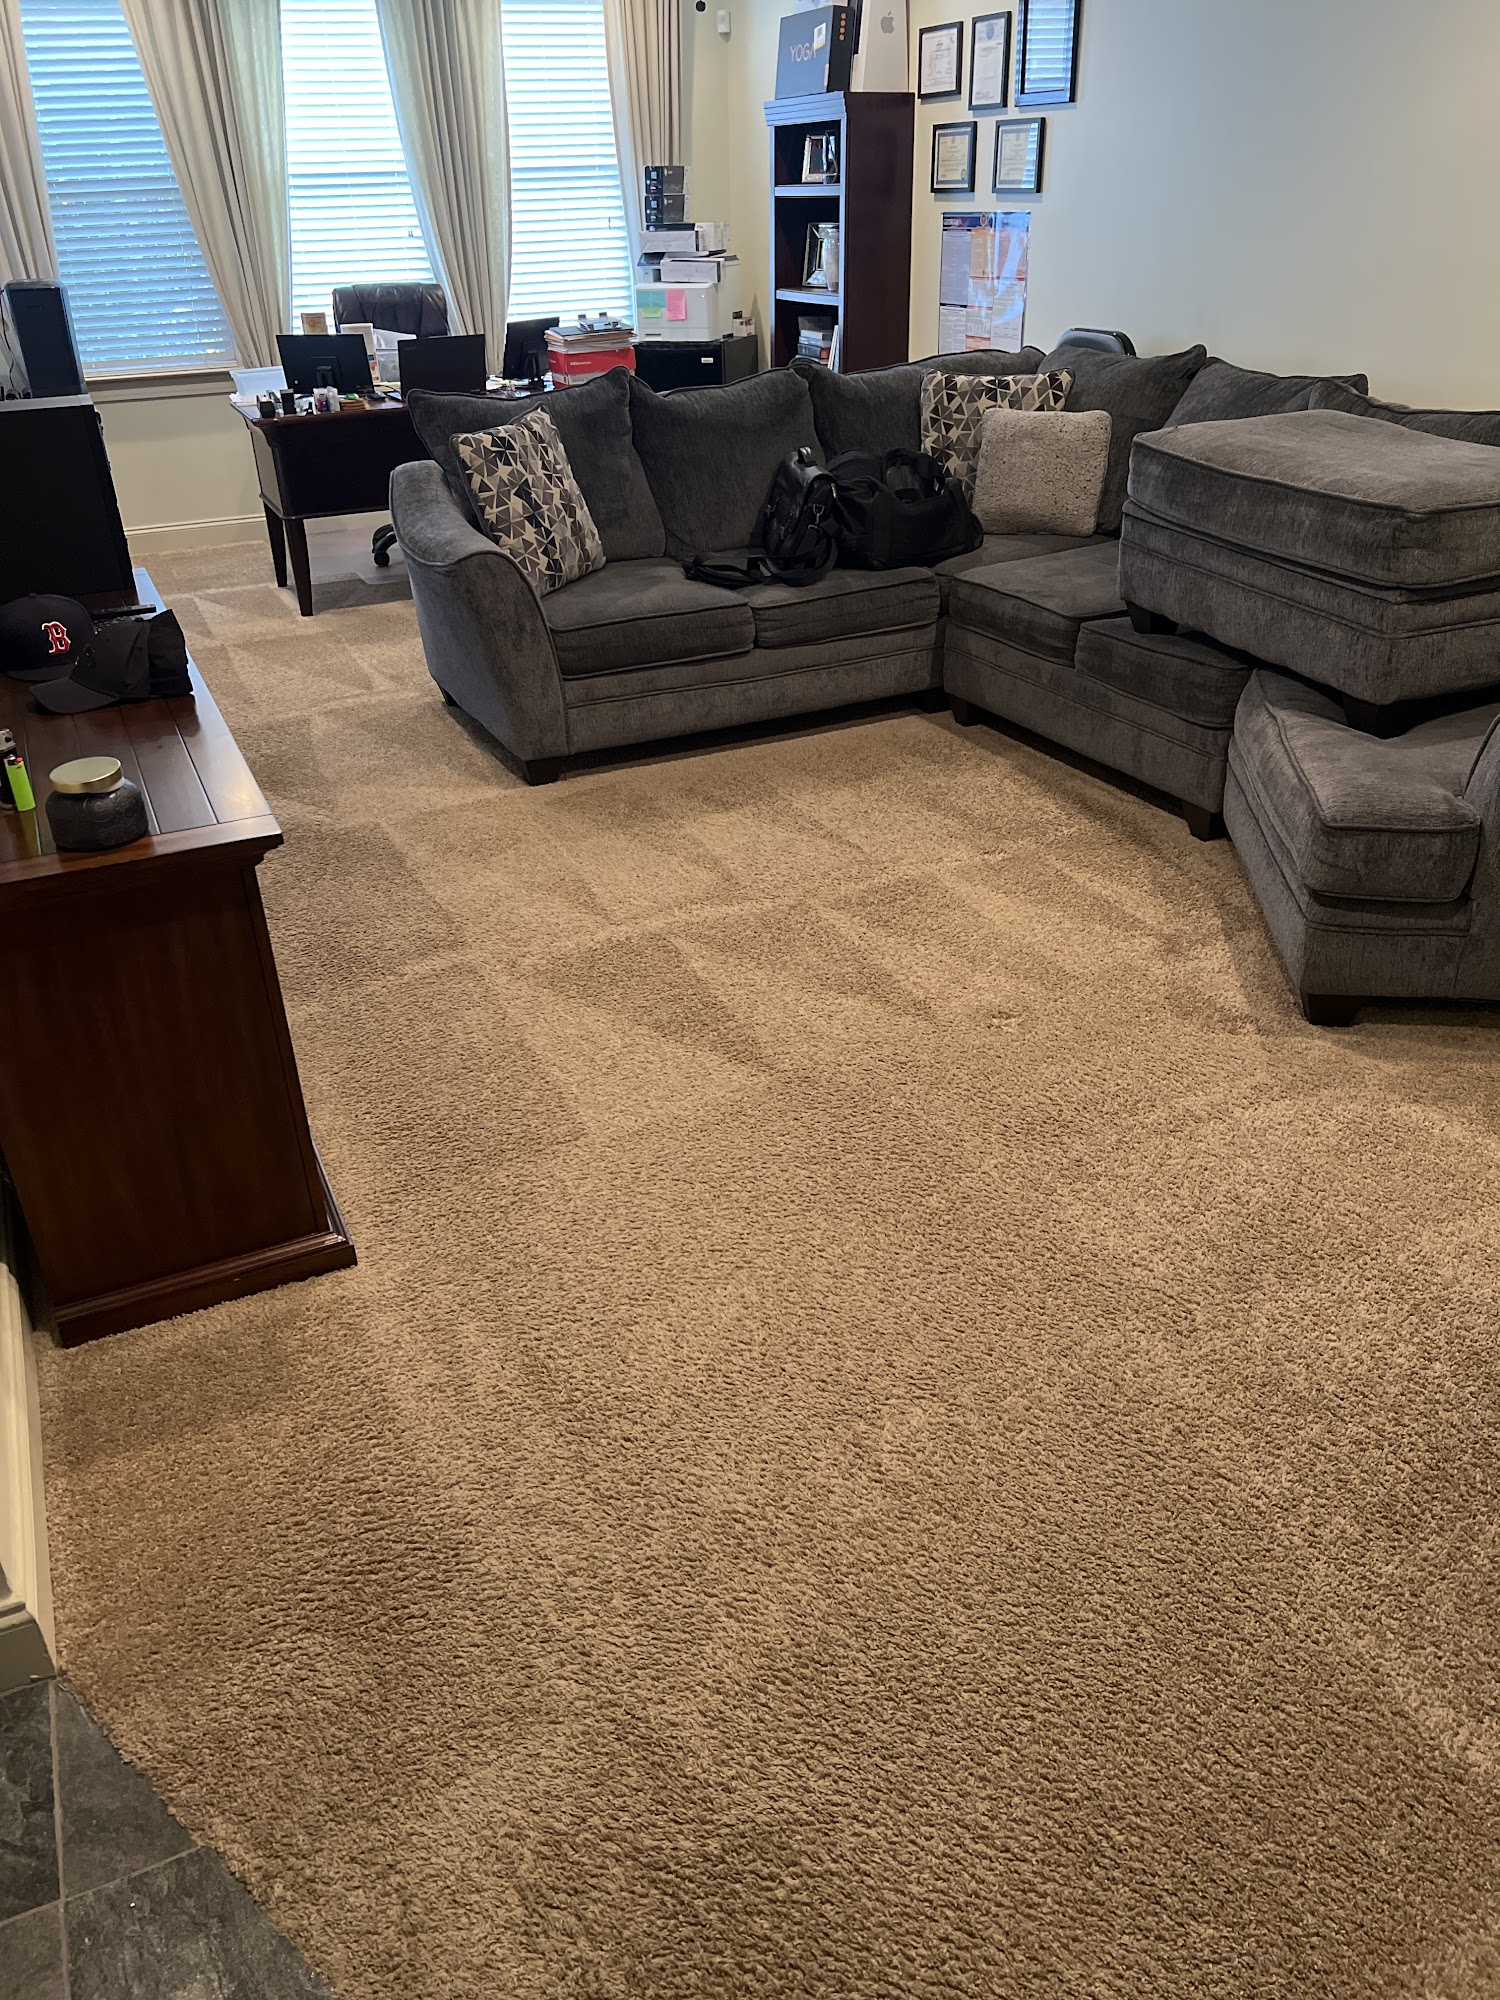 Safe-Dry Carpet Cleaning